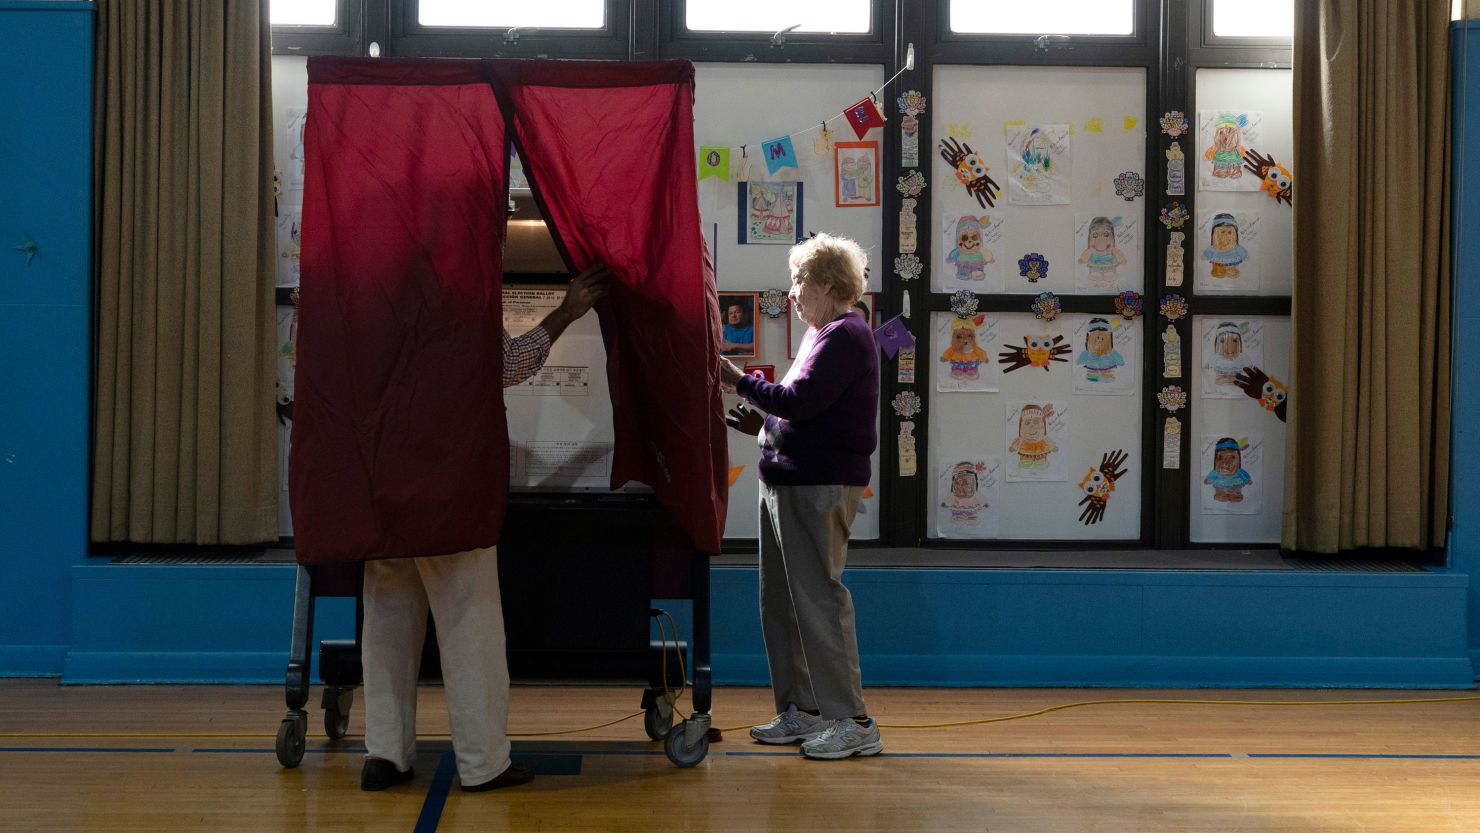 A poll worker sets up the voting machine for a man to cast his ballot at a school in Paramus, New Jersey, on November 8, 2022.